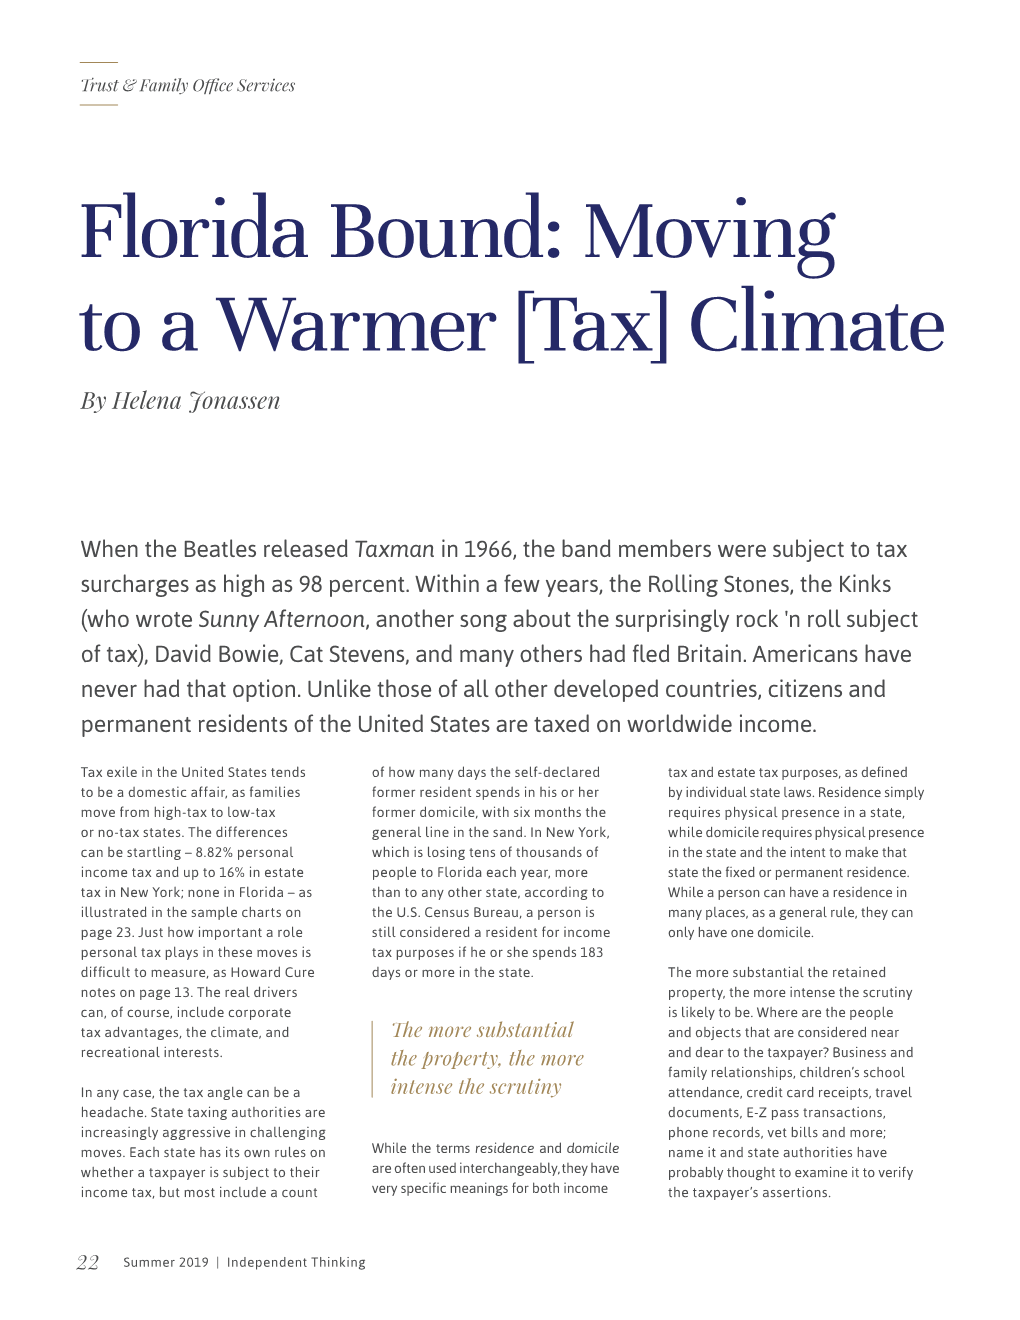 Florida Bound: Moving to a Warmer [Tax] Climate by Helena Jonassen